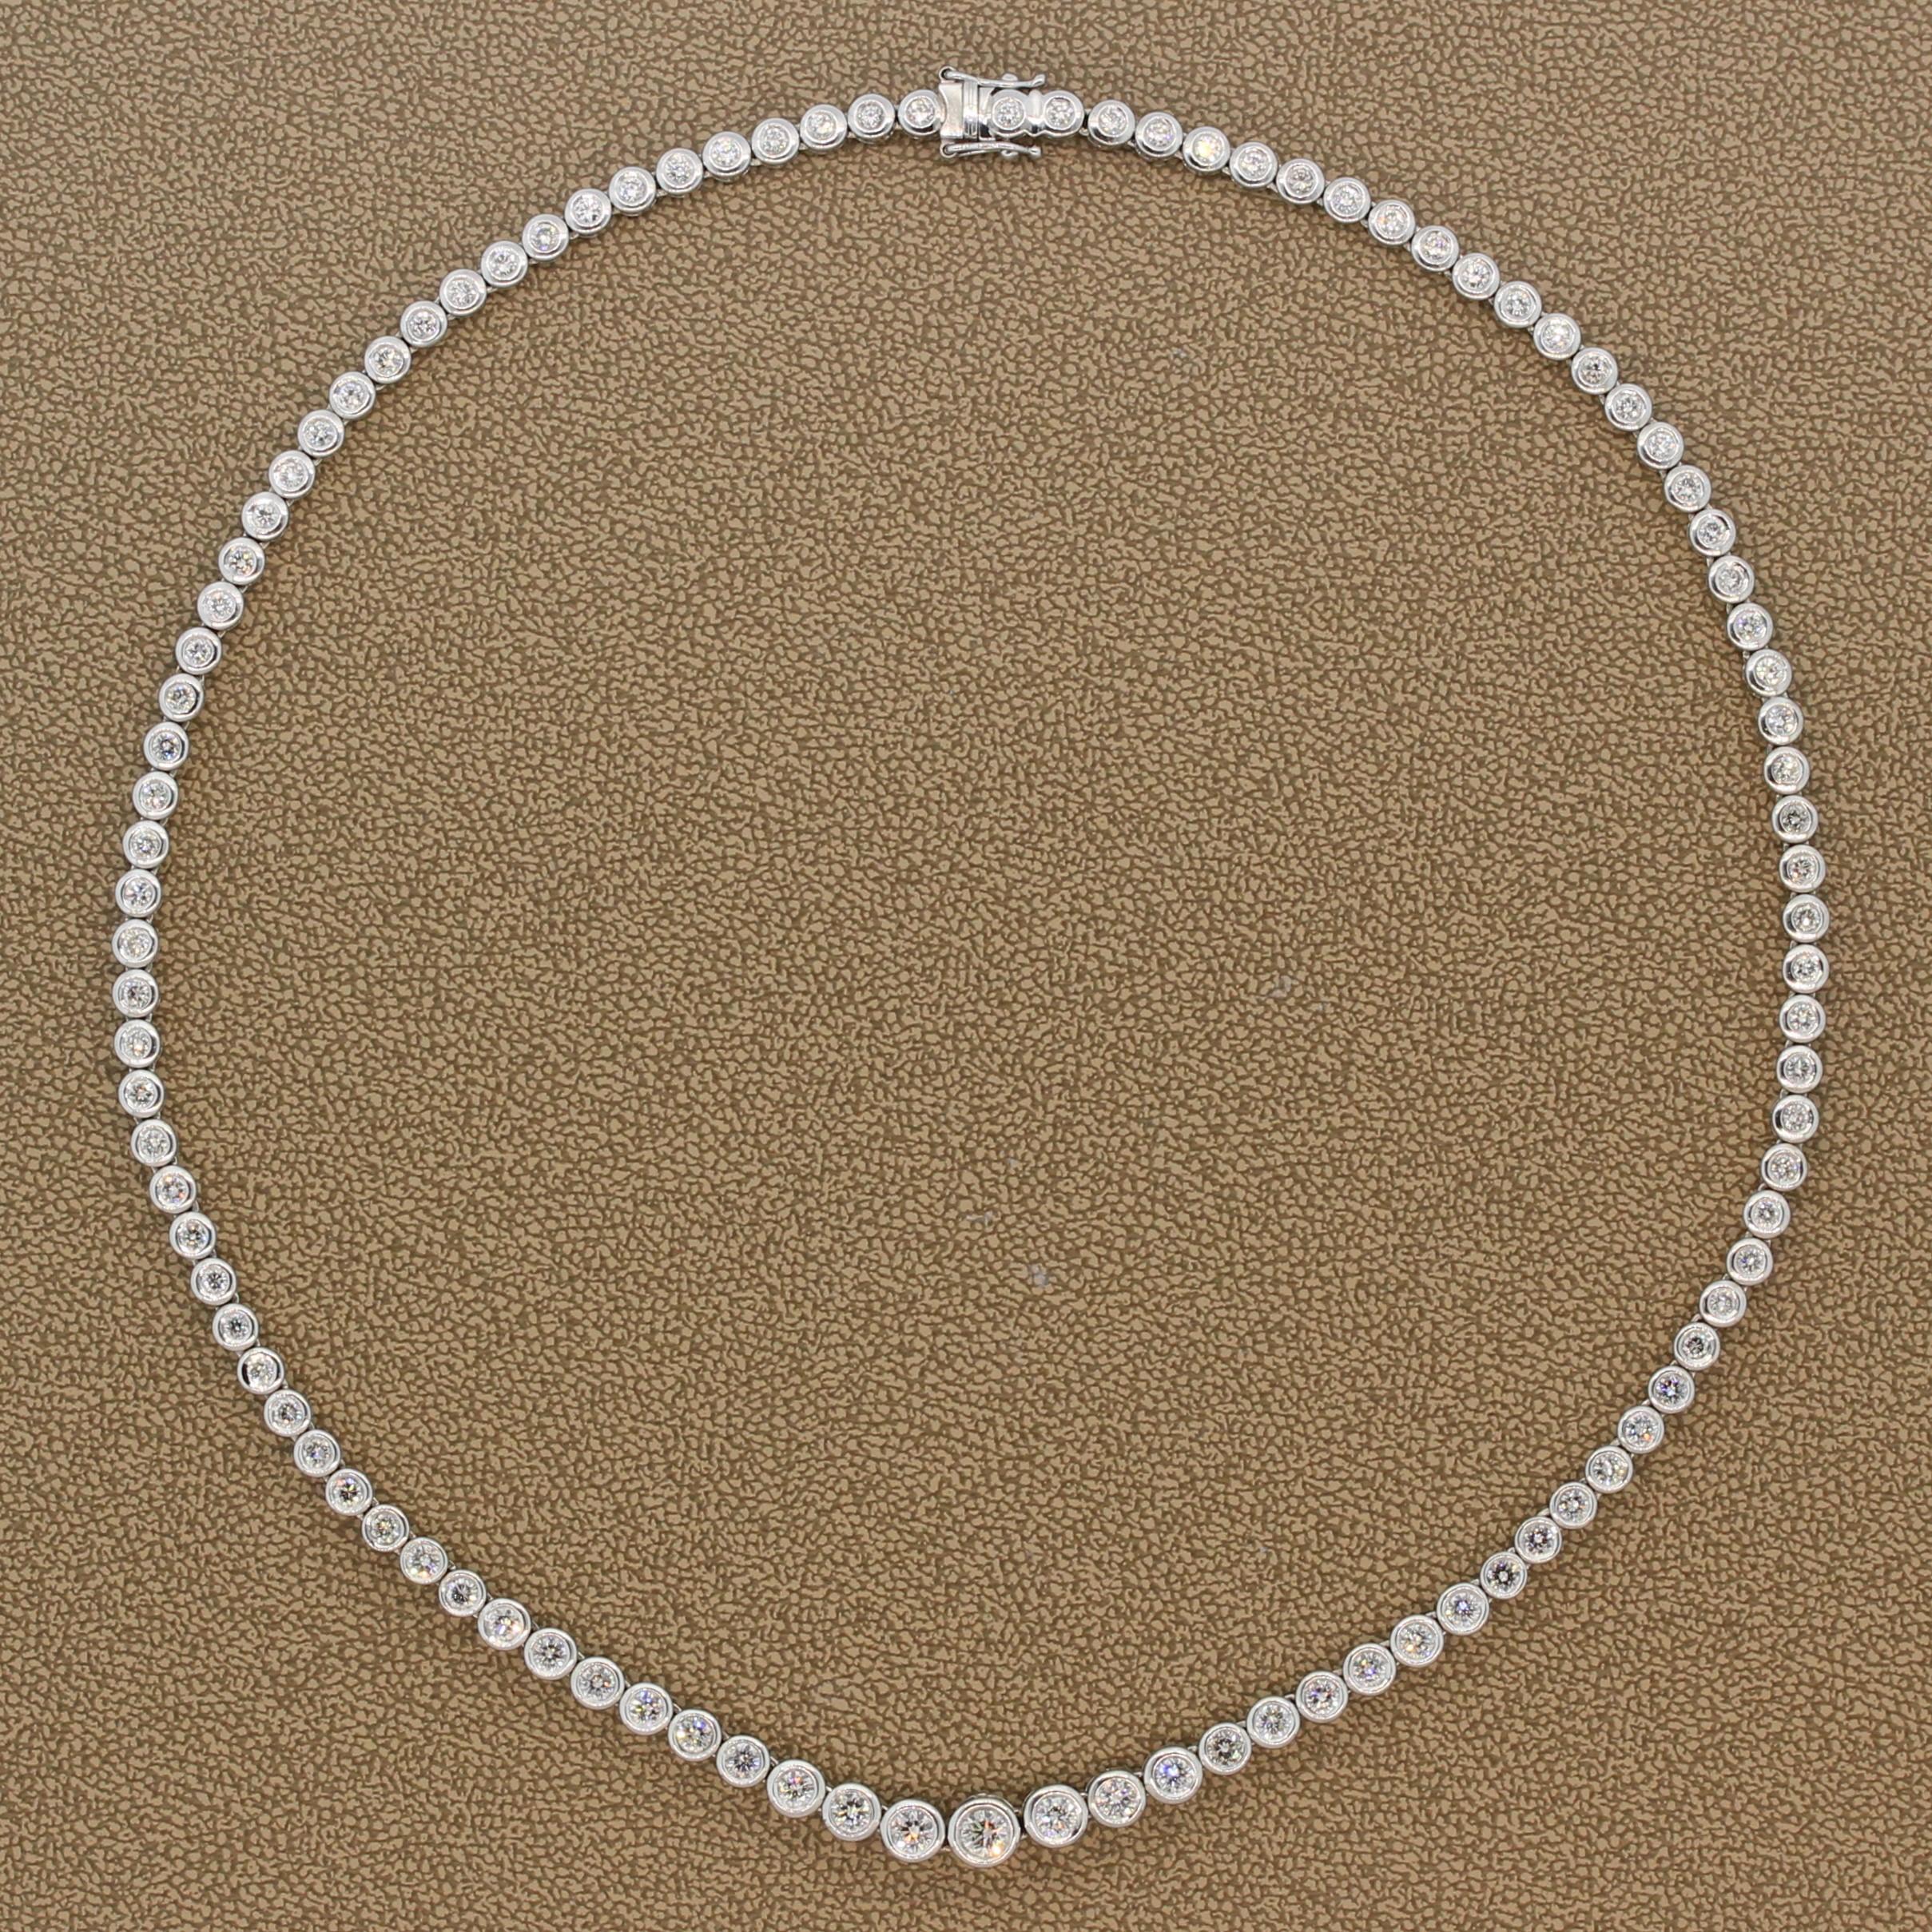 A crisply gleaming necklace featuring 6.88 carats of round cut diamonds. The graduating bezel set colorless VS-SI clarity diamonds are set in 18K white gold. This classic eternity necklace has a box clasp closure with a safety latch on each side. 